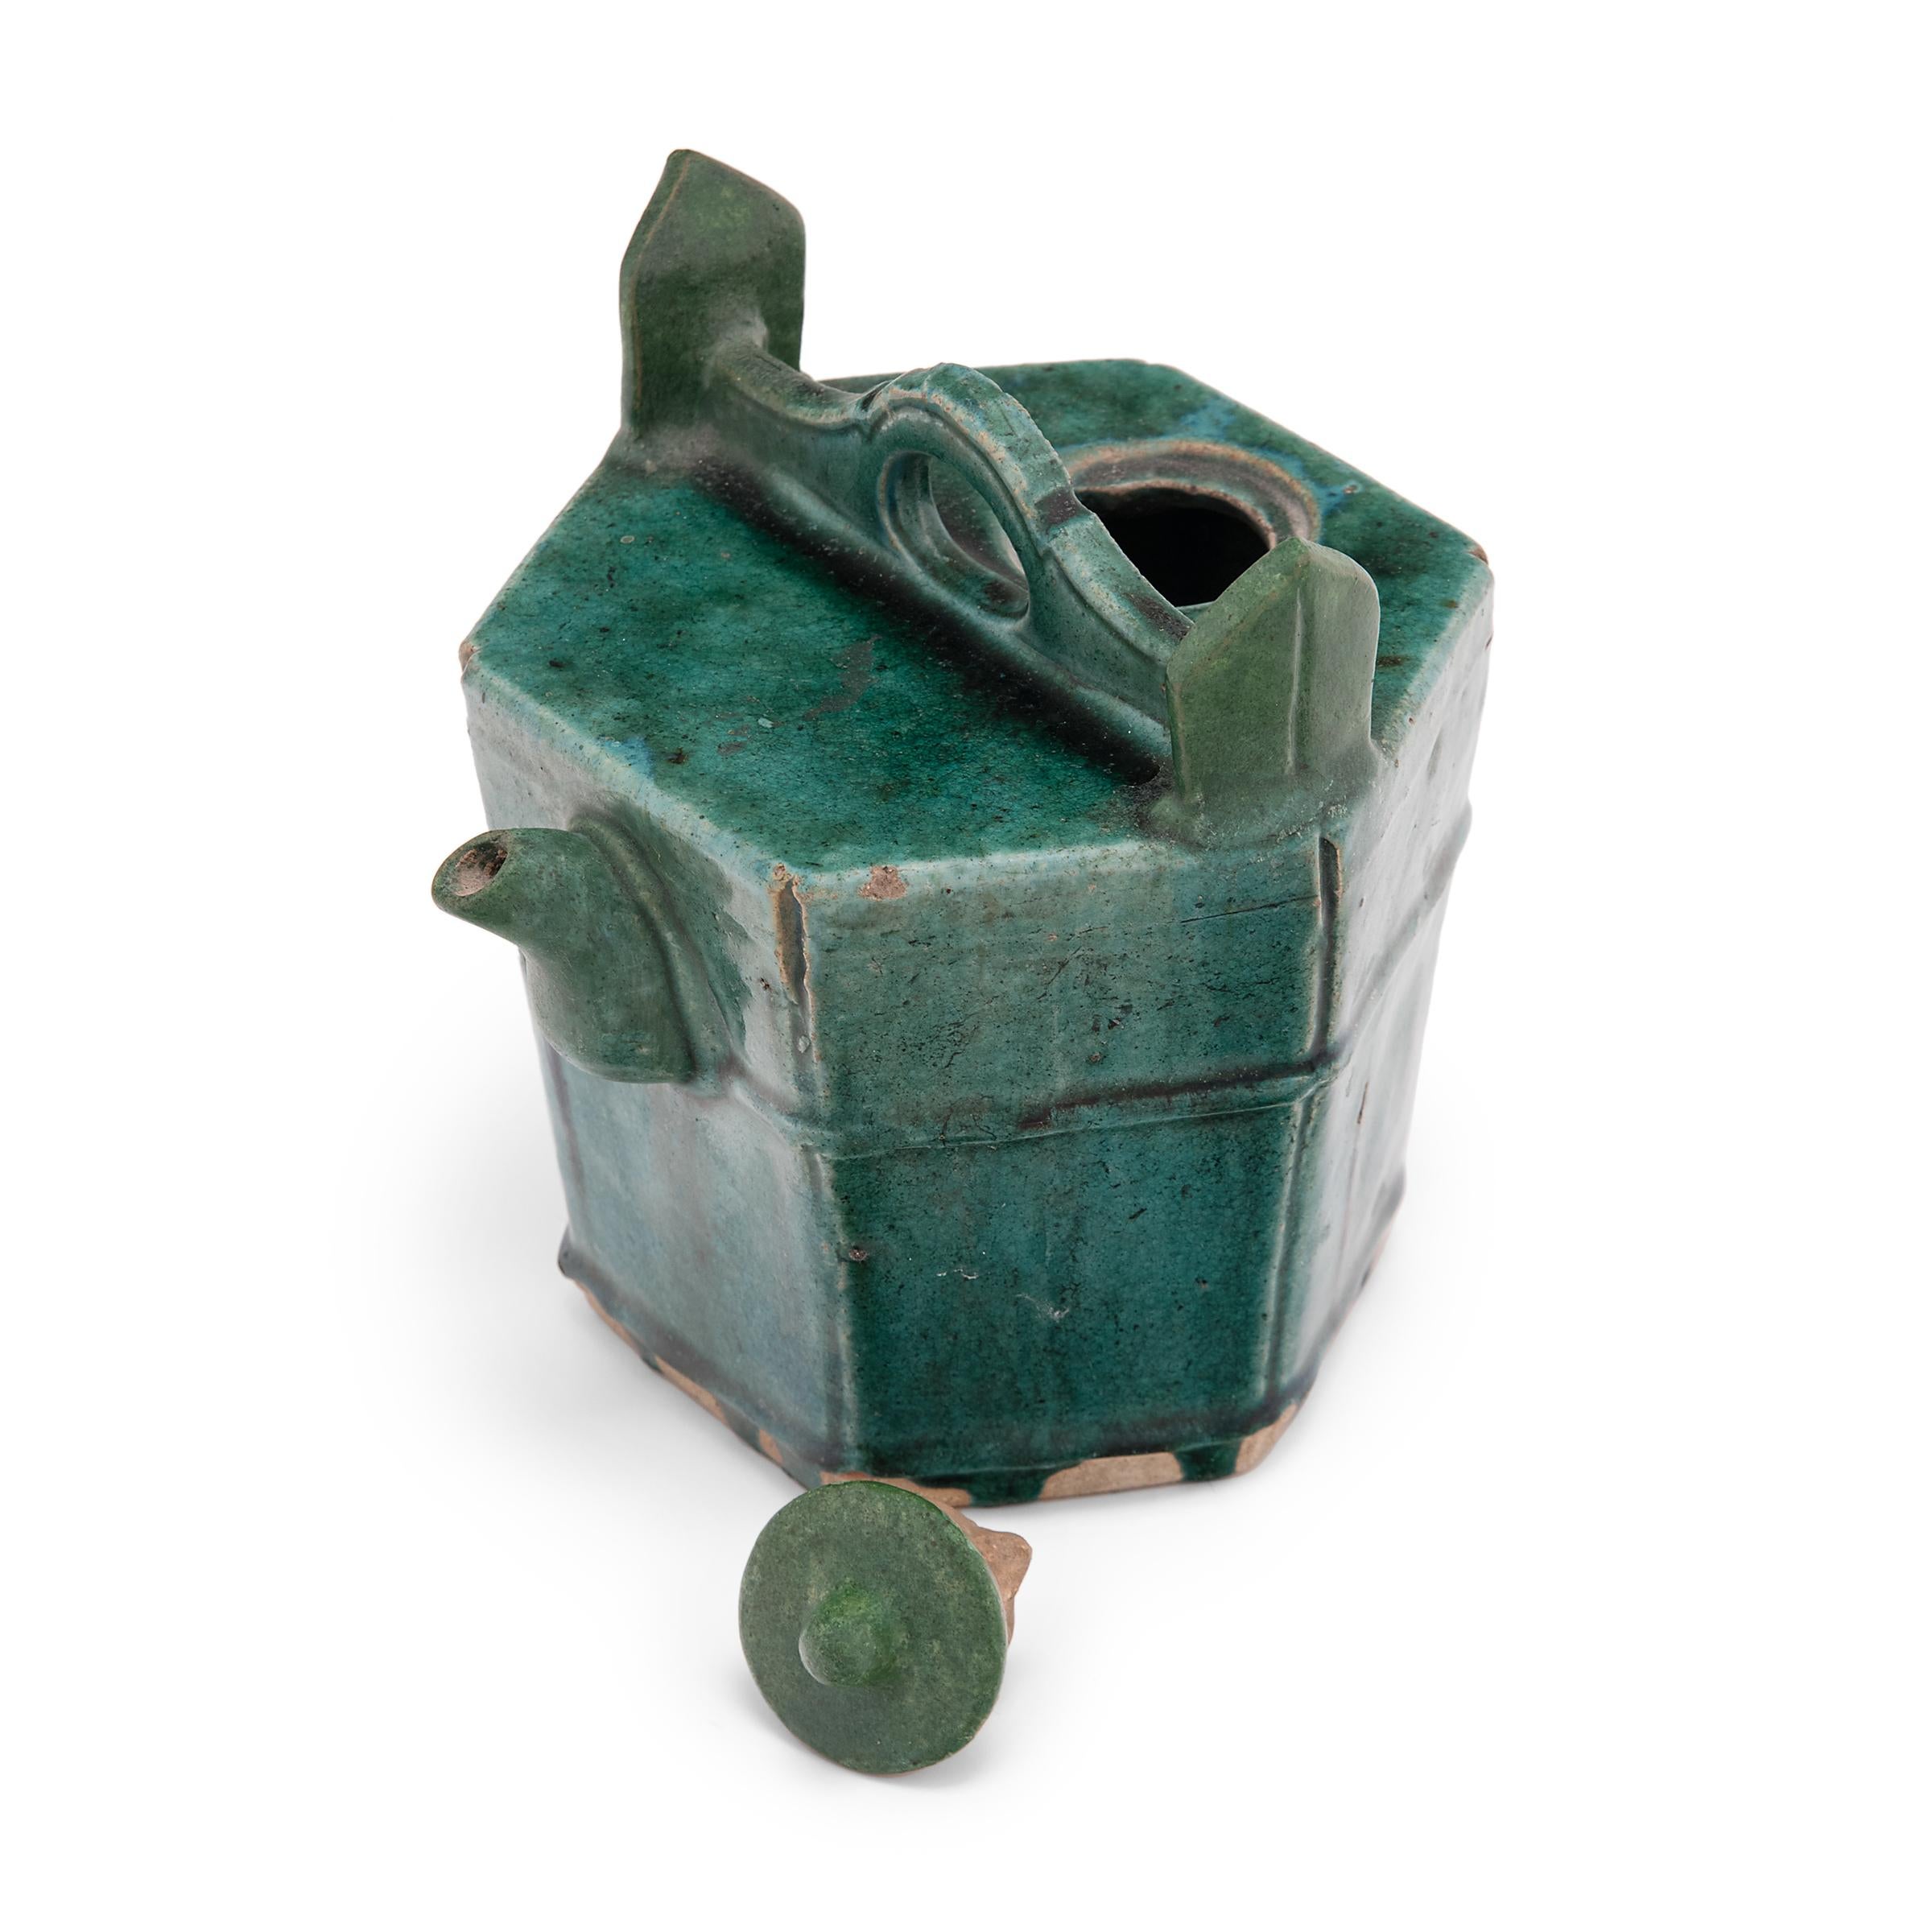 Stoneware Chinese Green Glazed Carrying Teapot, c. 1900